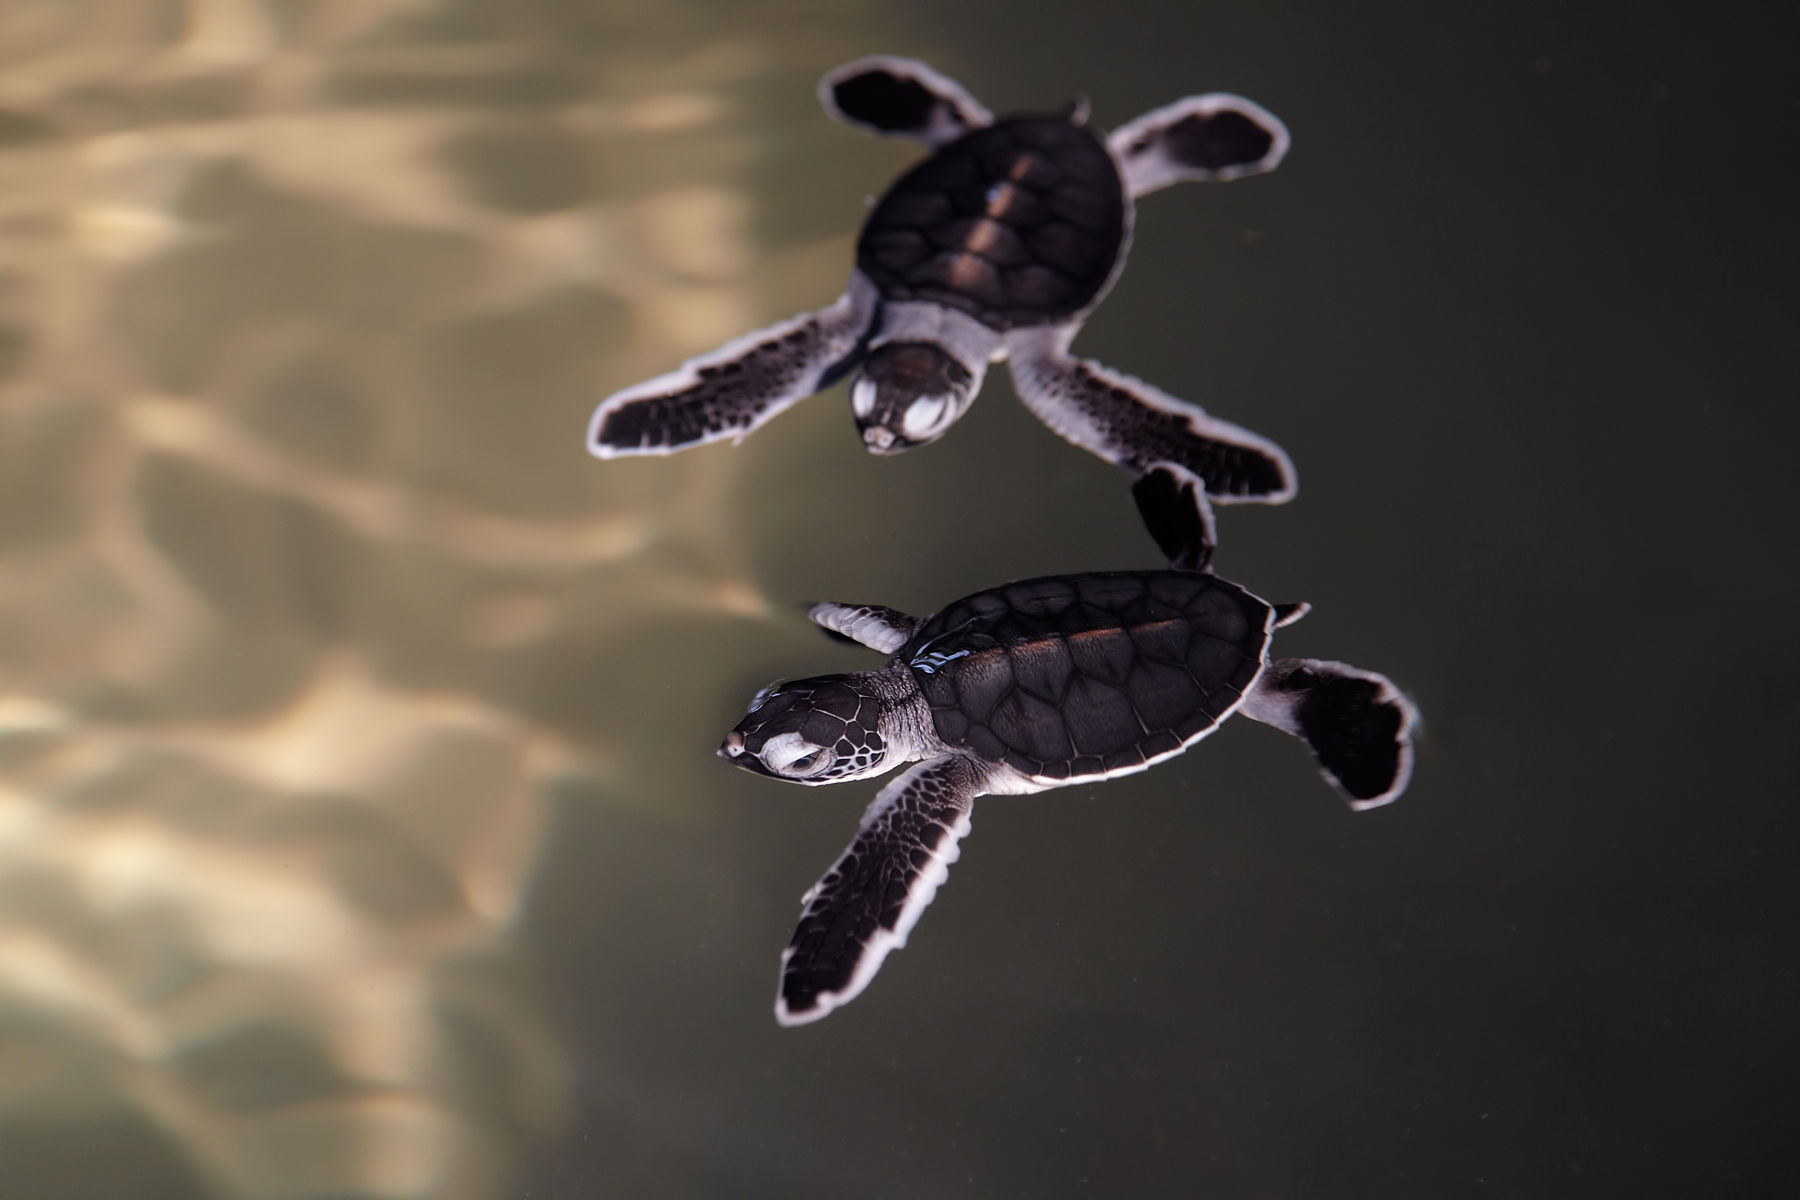 Baby Green Turtles